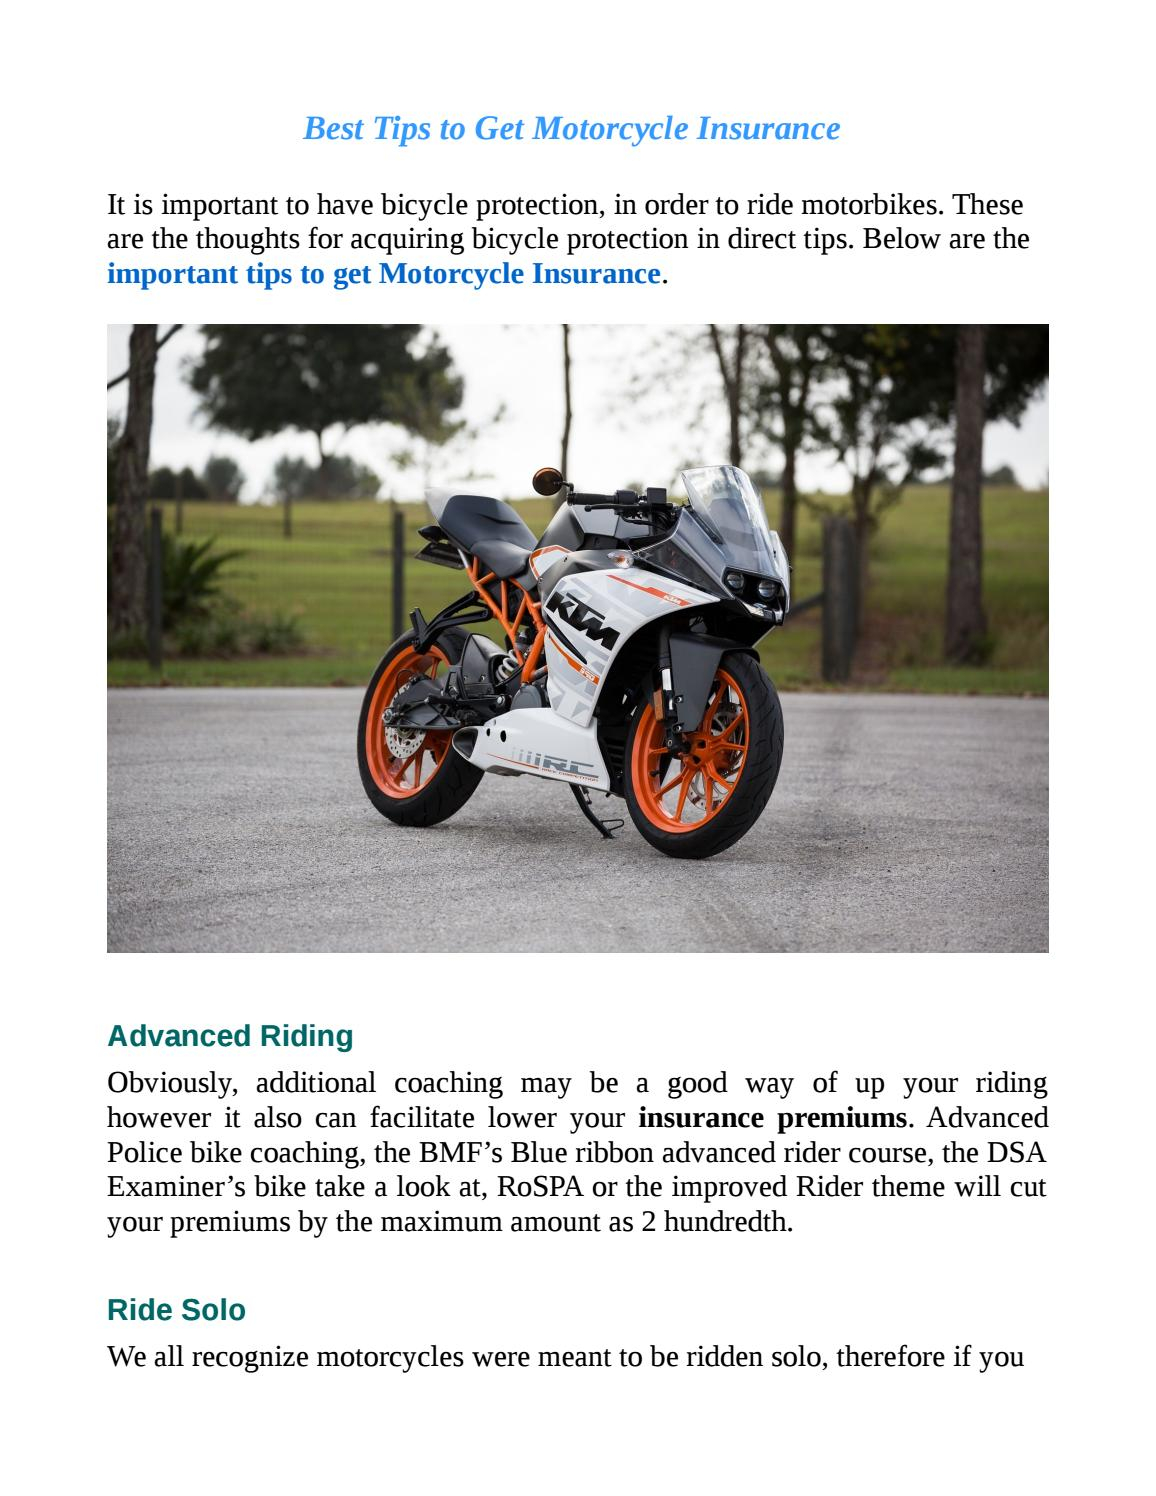 Tips To Get Motorcycle Insurance Raj Joshi Issuu intended for dimensions 1156 X 1496